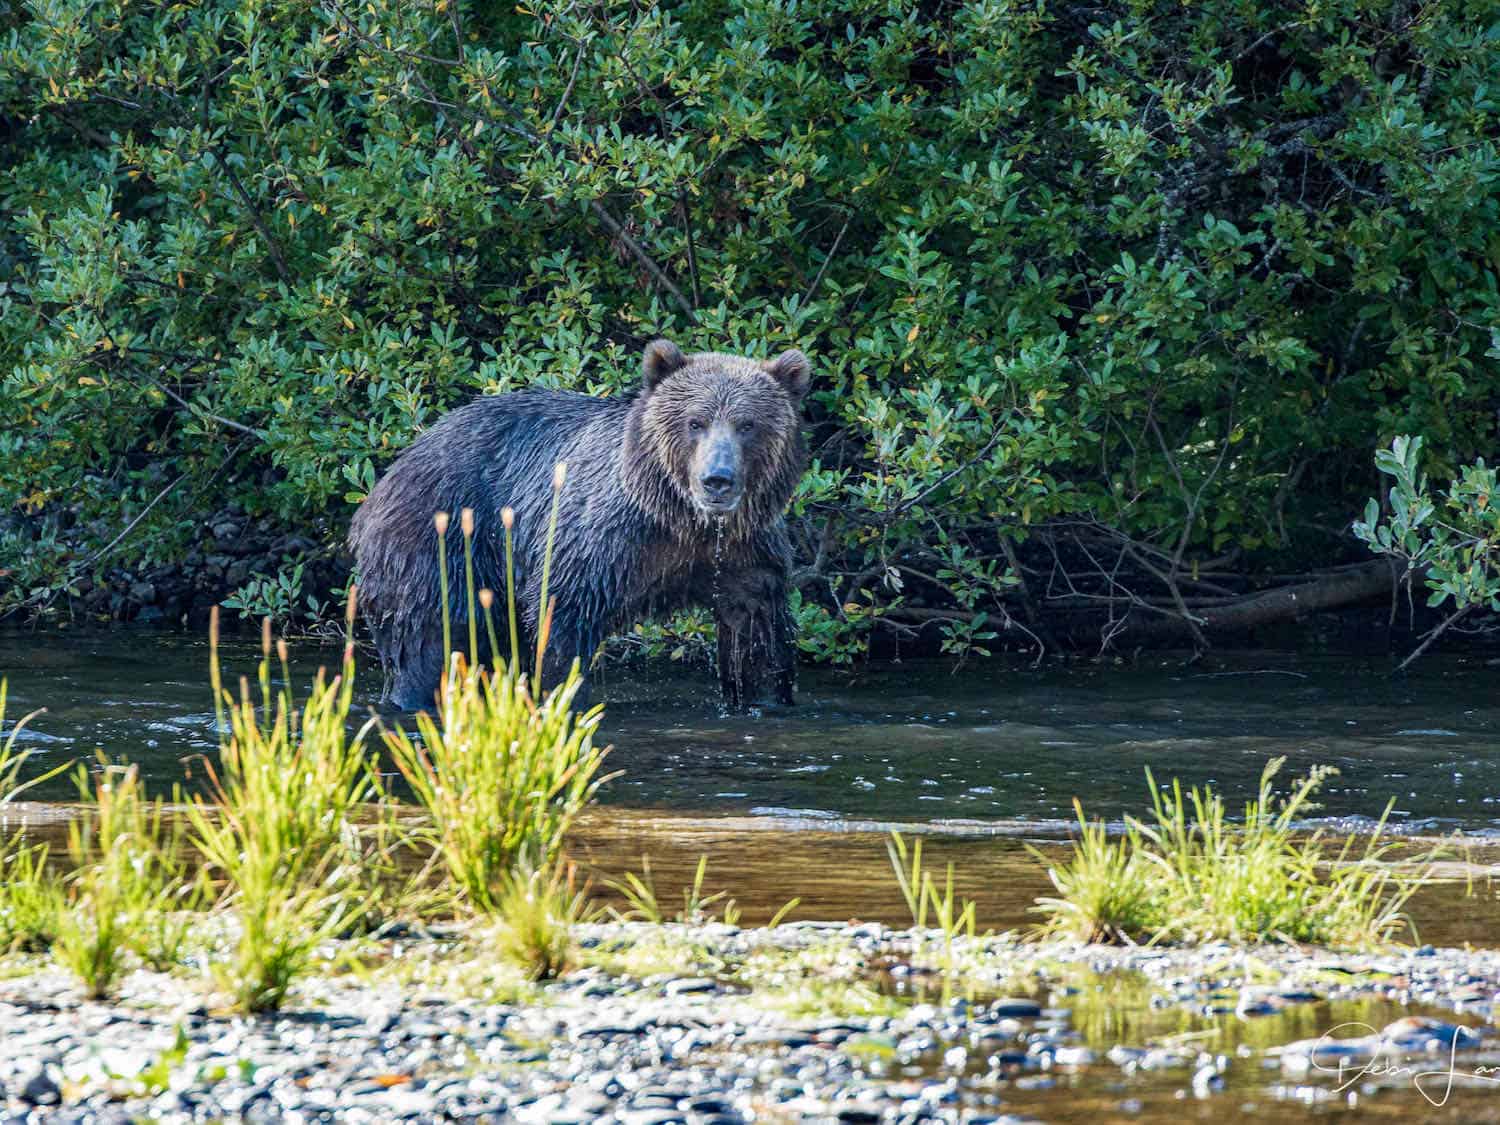 Kodiak bear next to a river with water dripping off his chin.